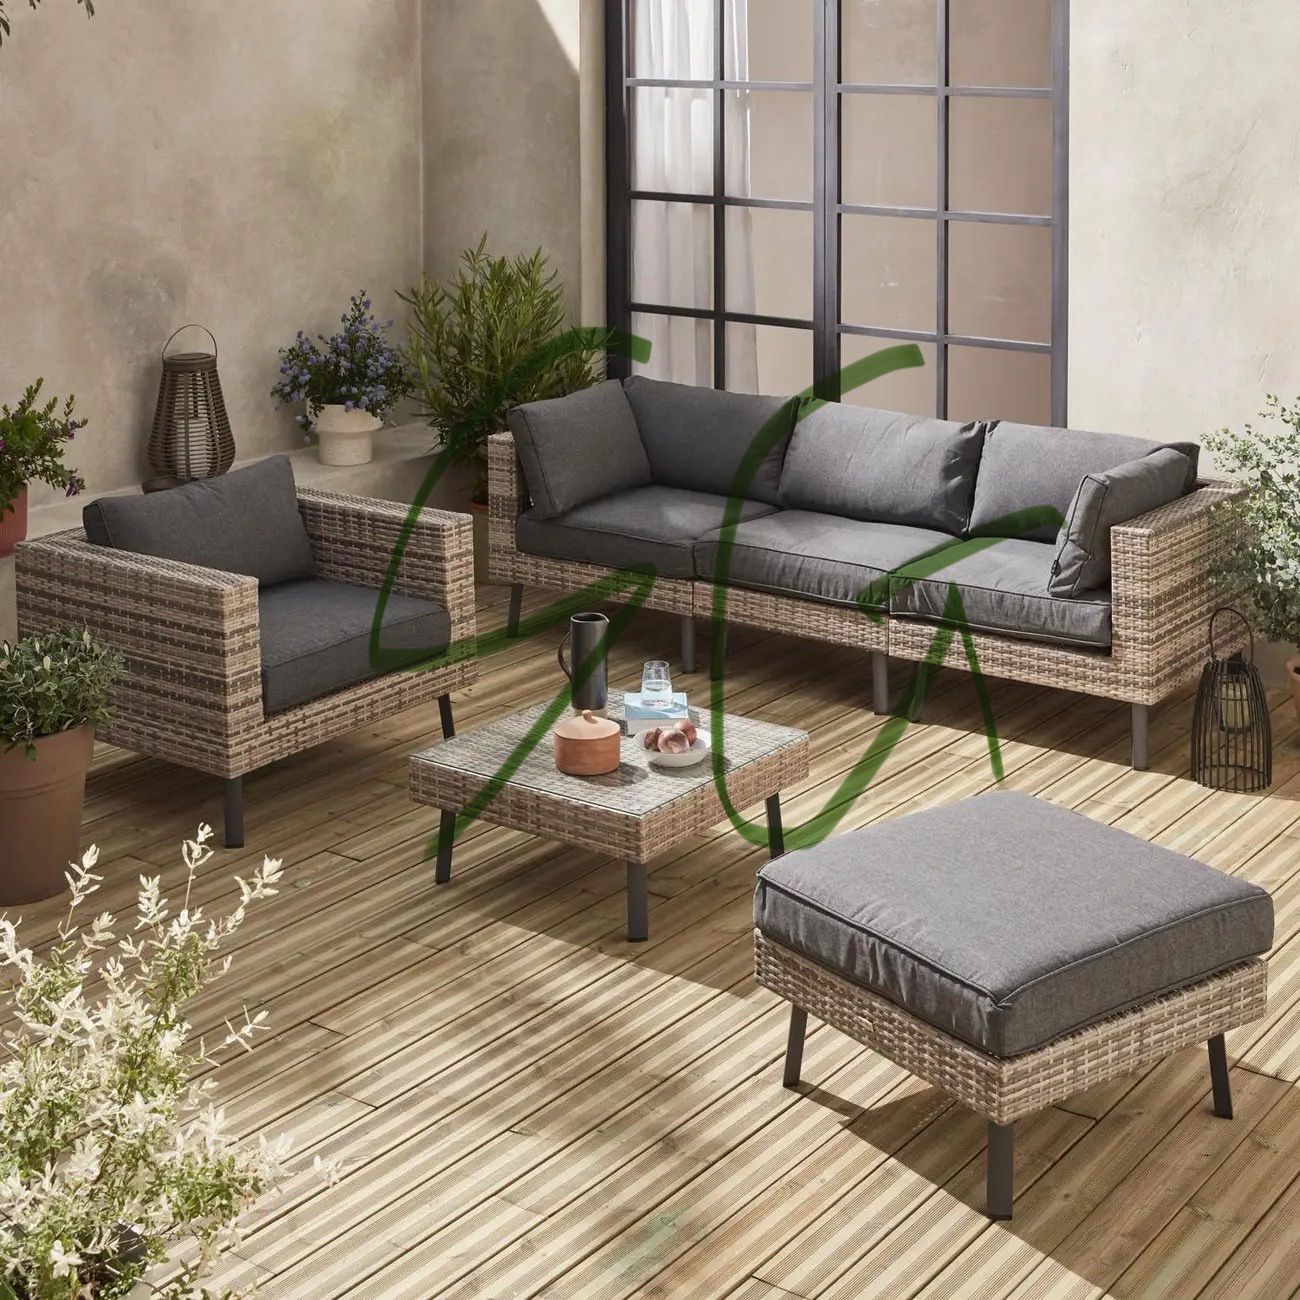 New In box Patio Outdoor Furniture Sofa Deep Seating 